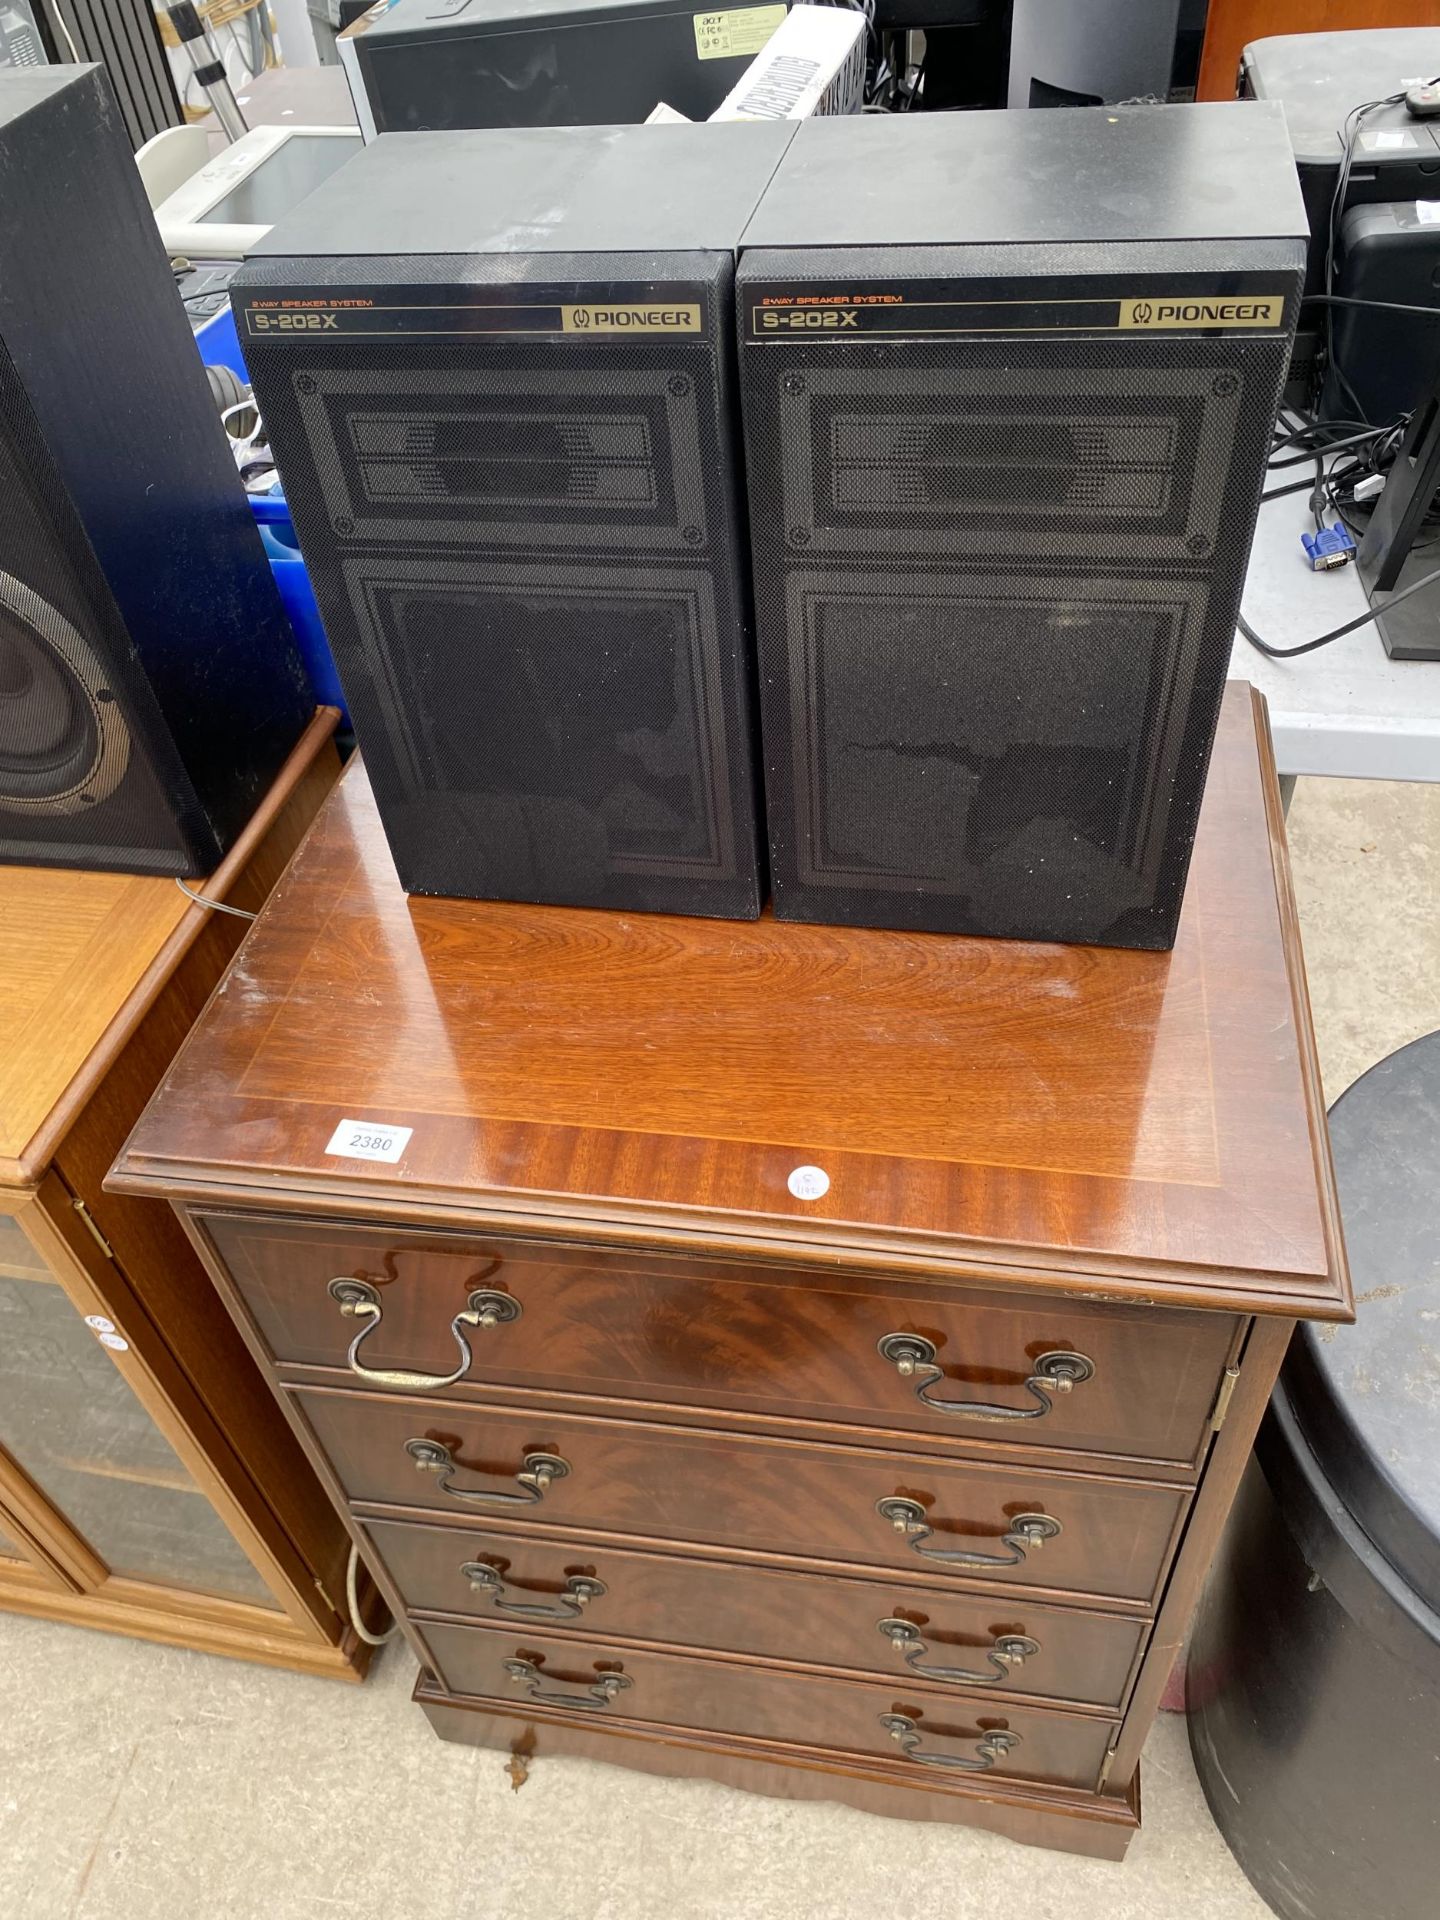 A RETRO MEDIA CABINET WITH A PIONEER STEREO SYSTEM AND TWO PIONEE SPEAKERS